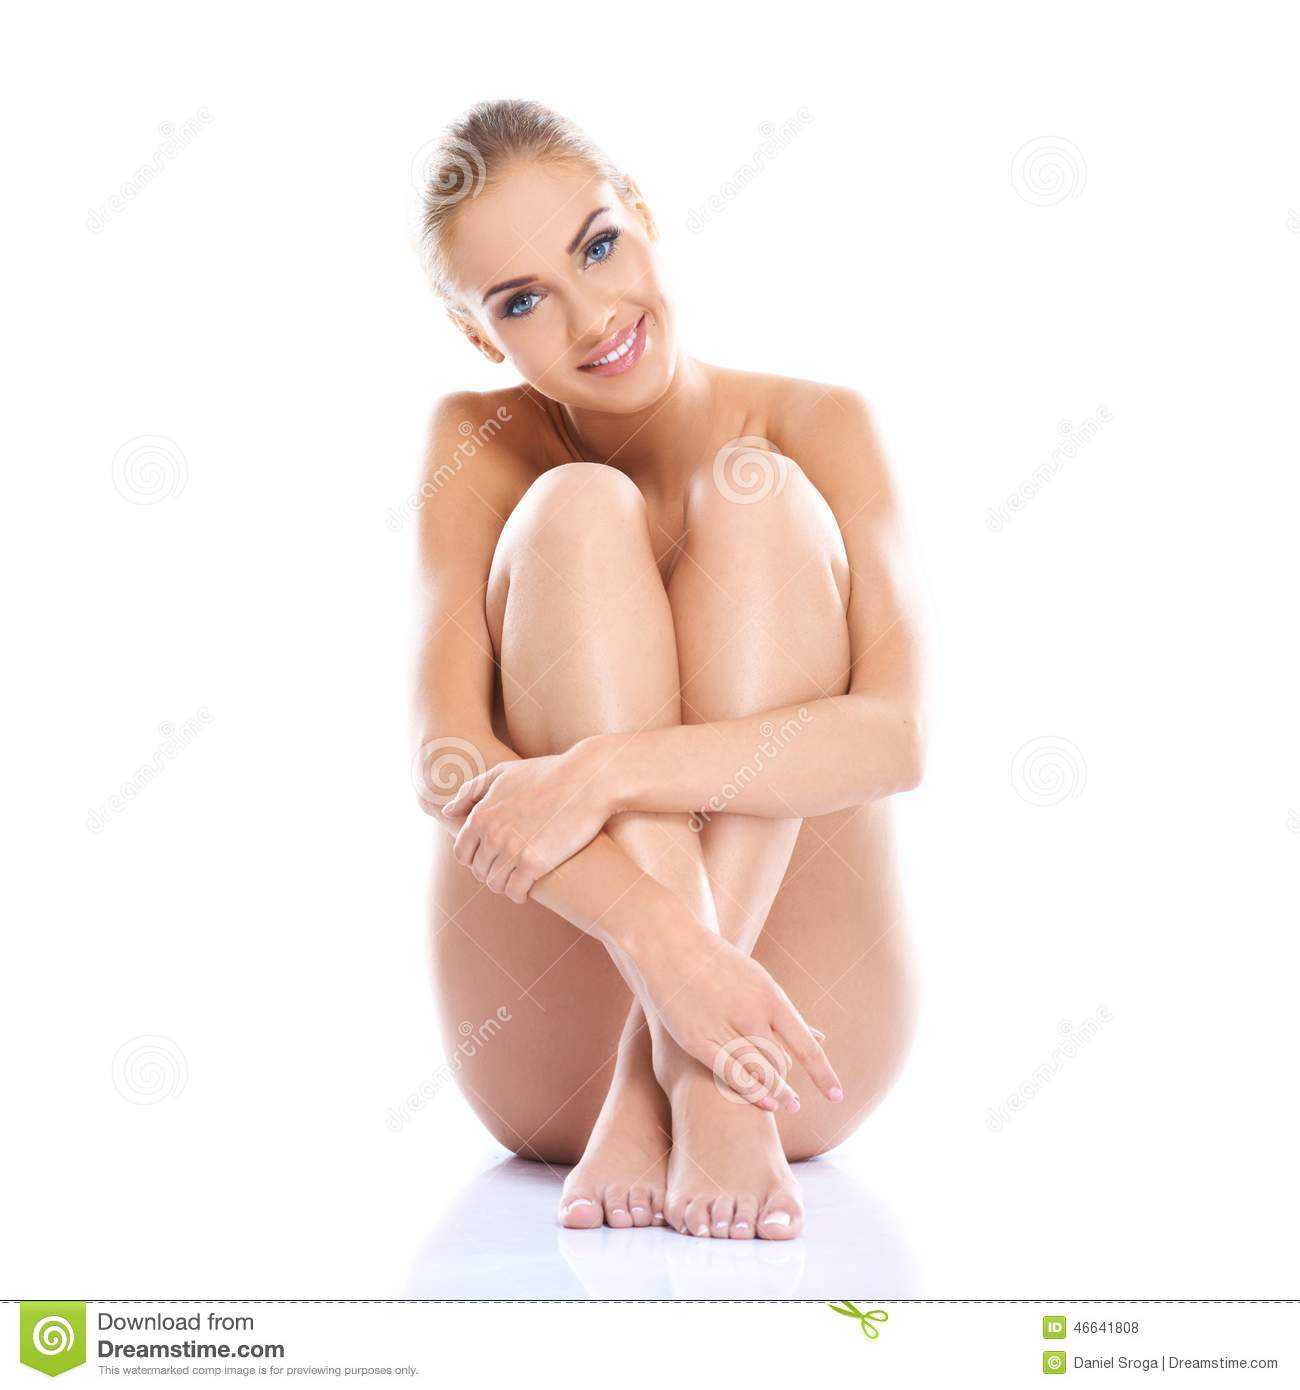 Nude girl with no arms or legs